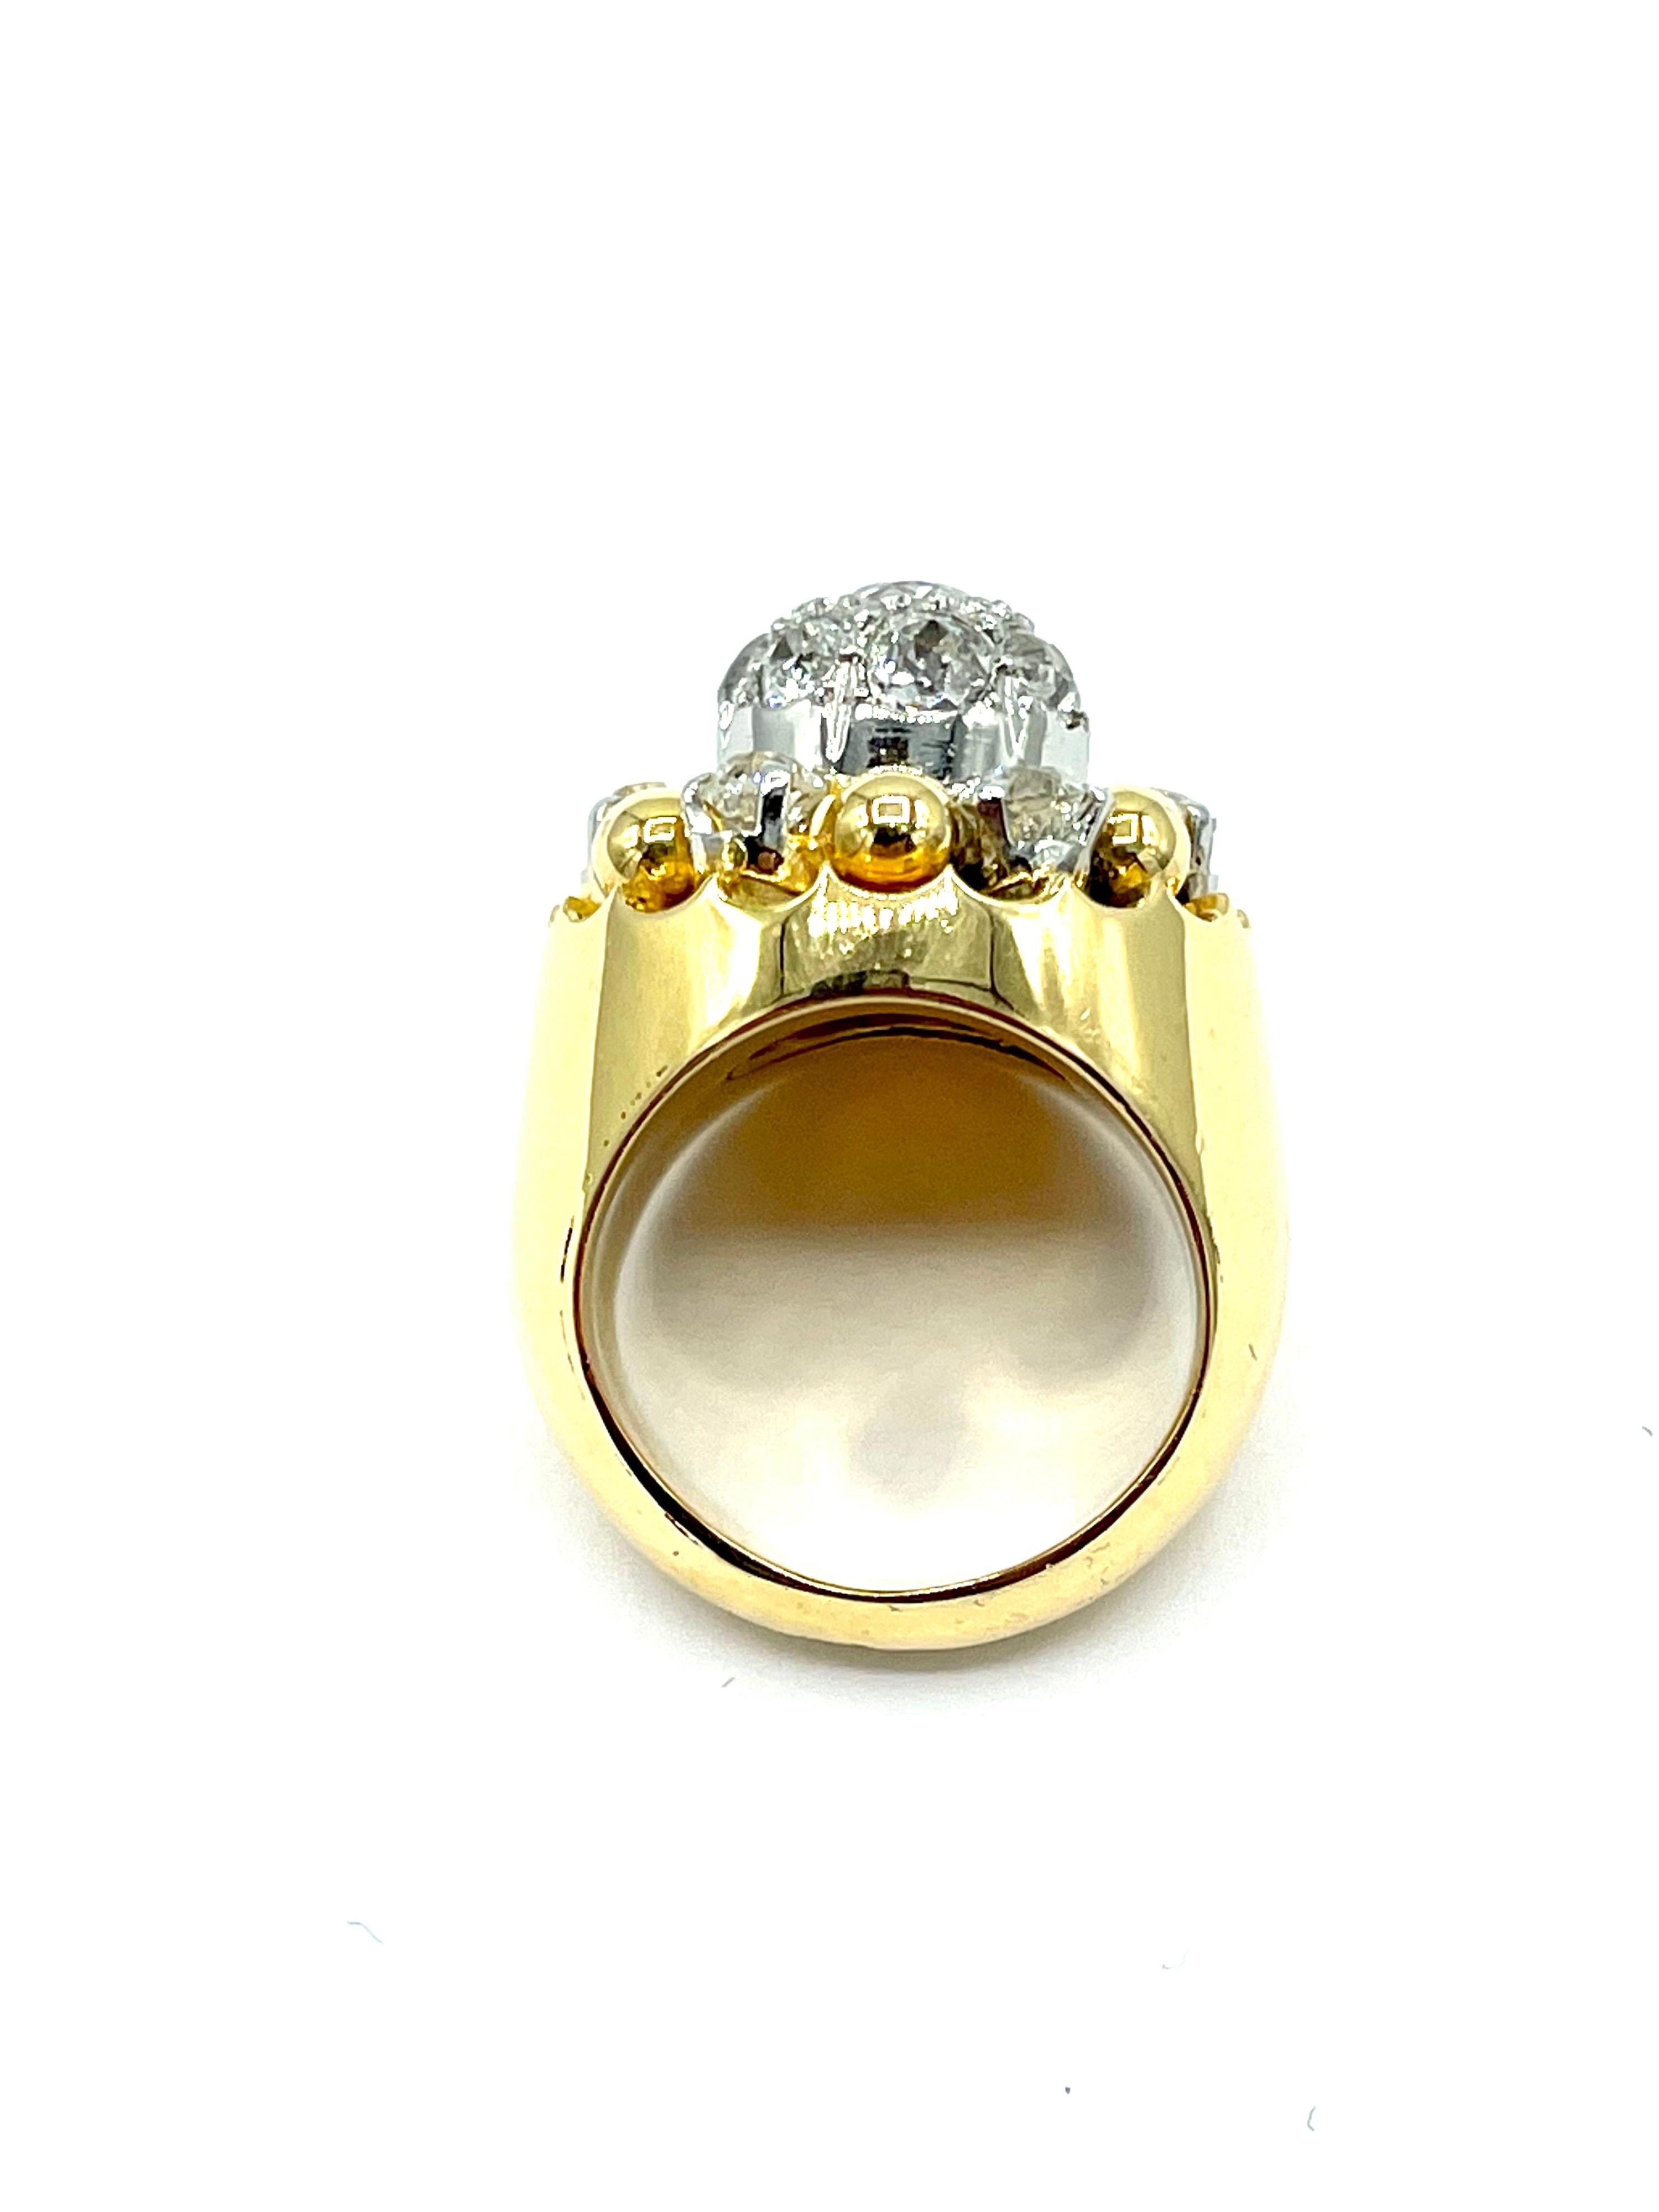 Women's French Made 2.10 Carat Old European Cut Diamond and 18k Yellow Gold Ring For Sale